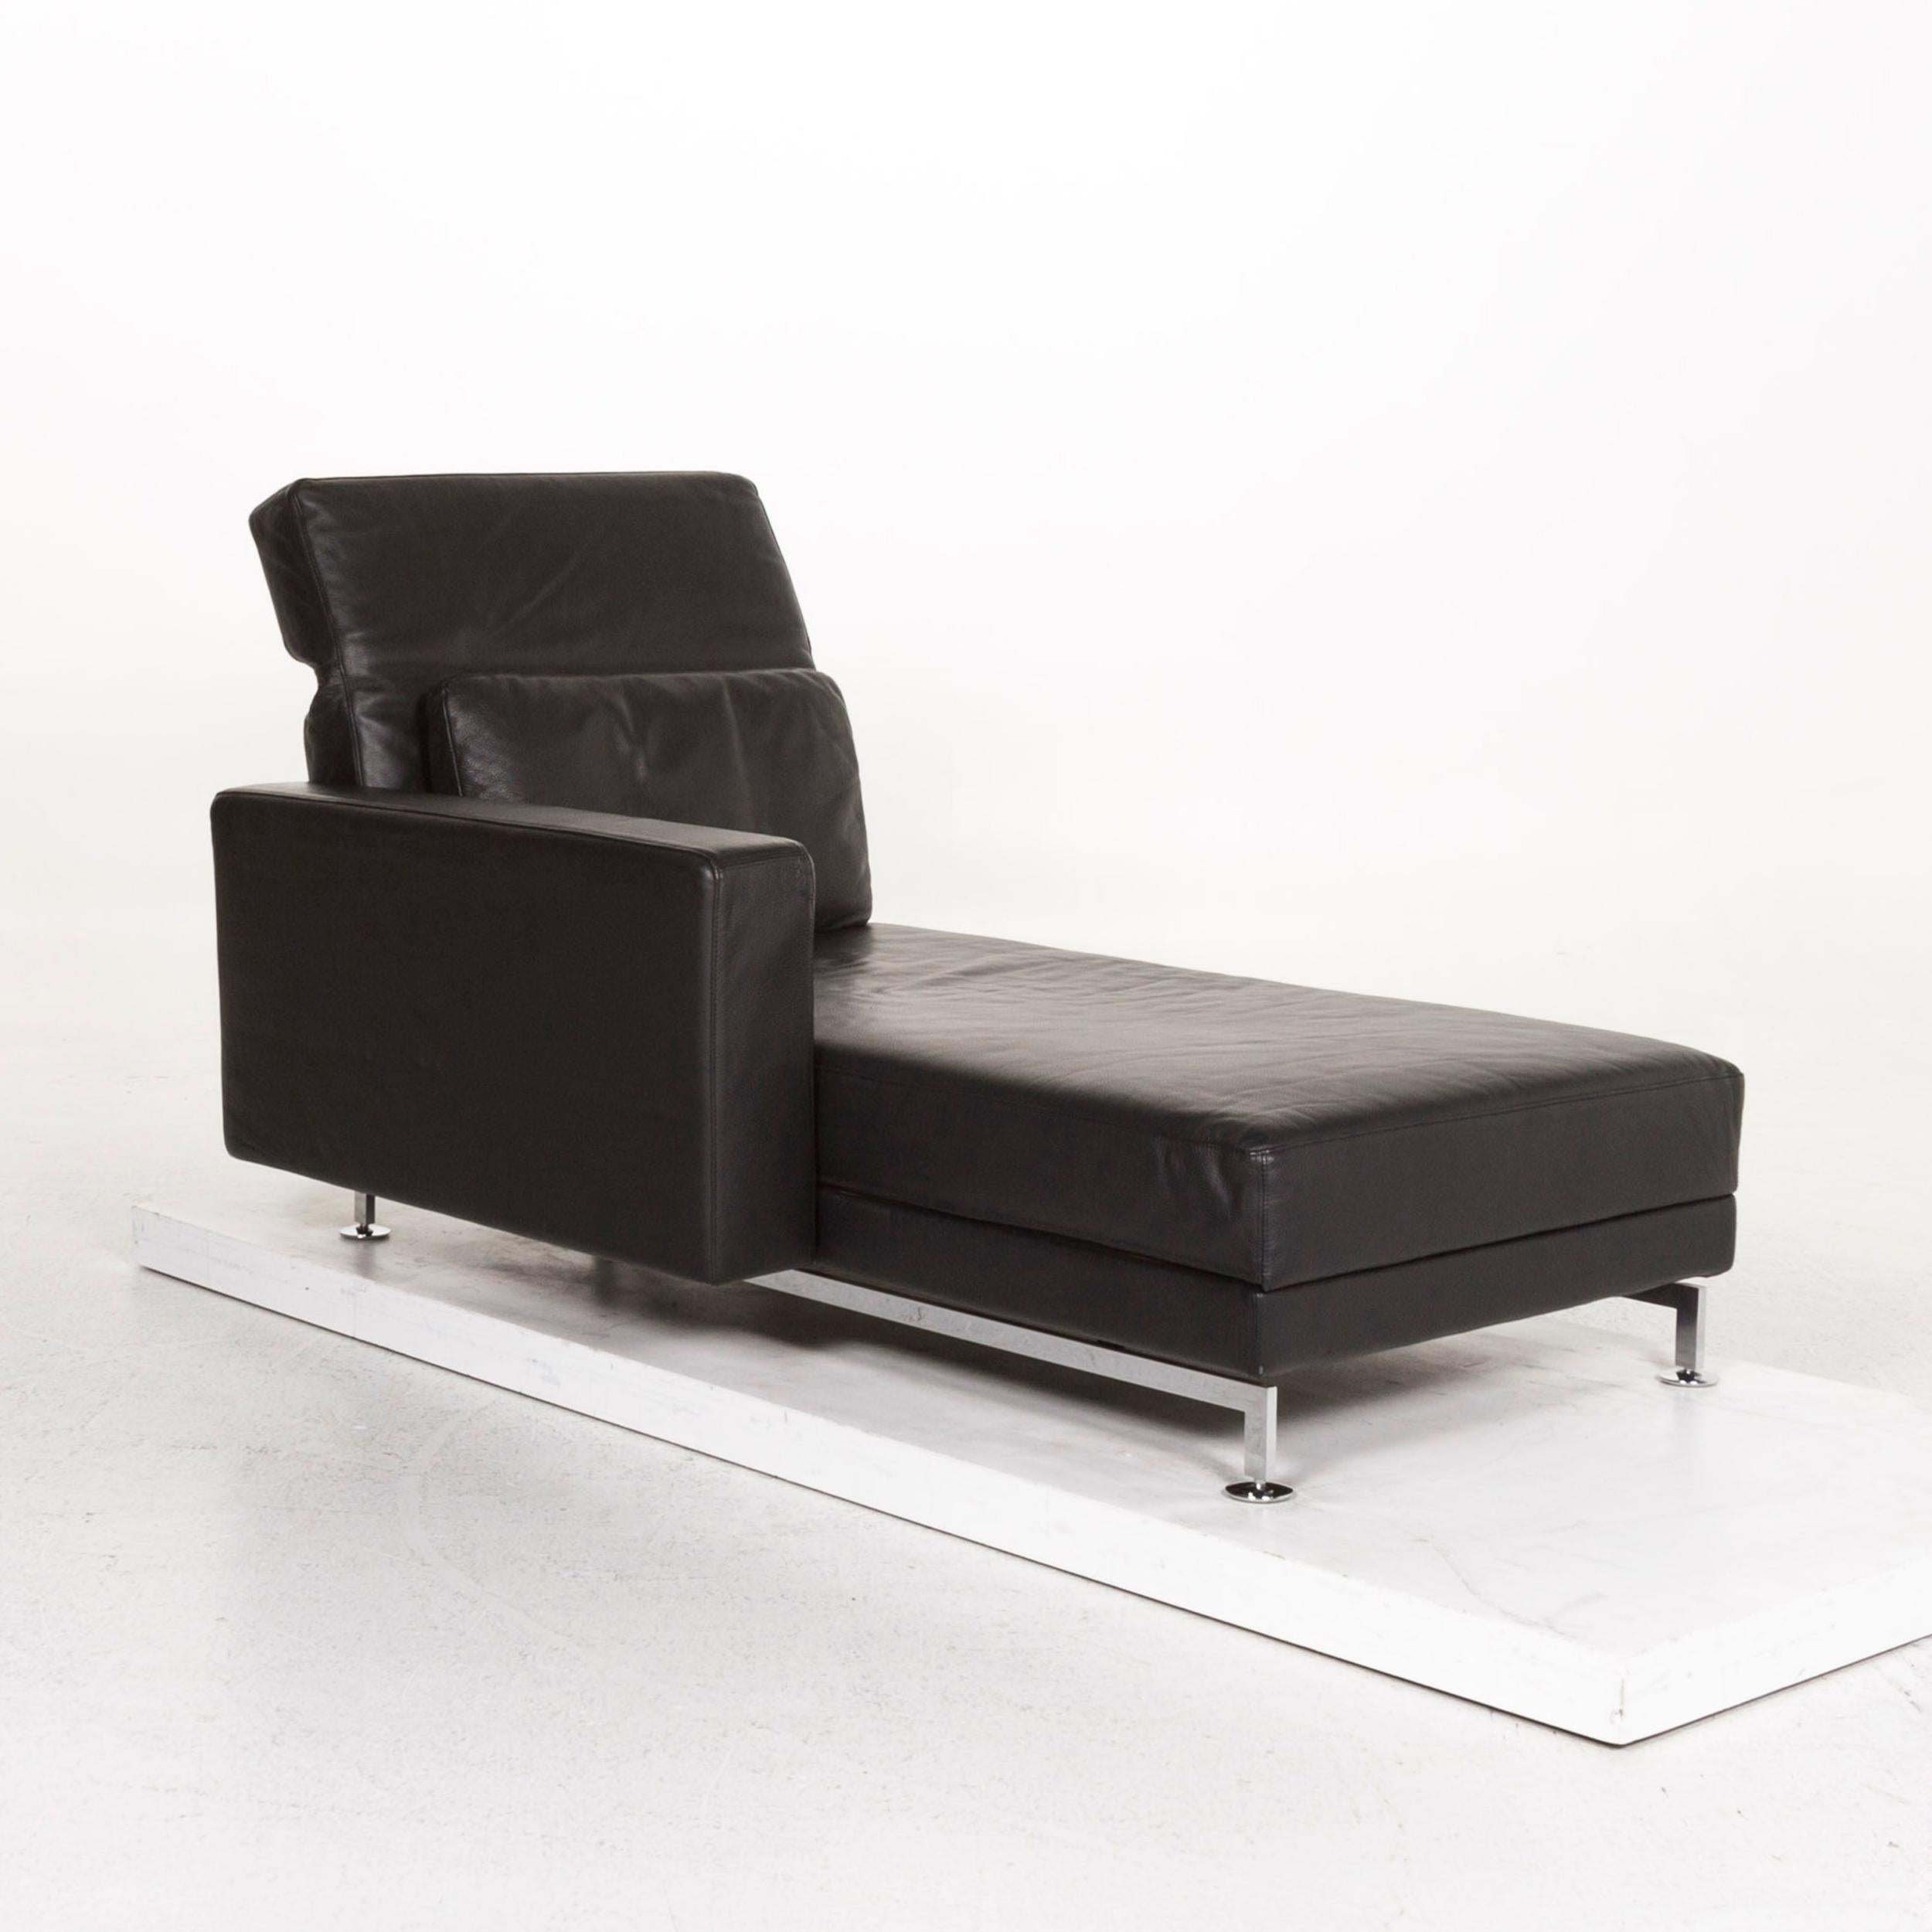 Brühl & Sippold Moule Leather Lounger Black Function Relax Function For Sale 1